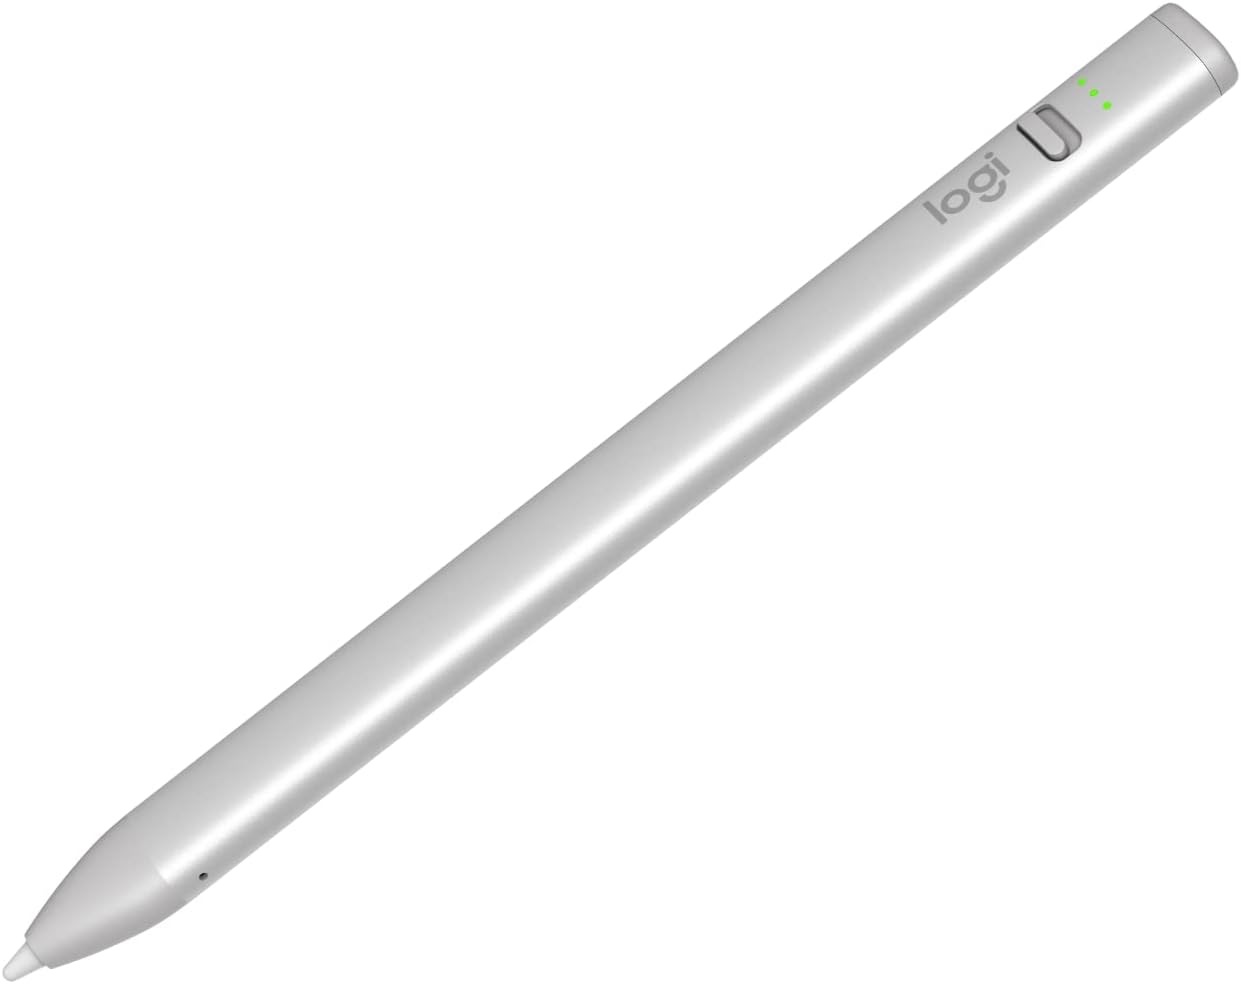 Logitech Crayon Digital Pencil (iPads with USB-C Ports) Featuring Apple Technology, No Lag Pixel-Precision, and Dynamic Smart Tip with Fast Charge - Silver